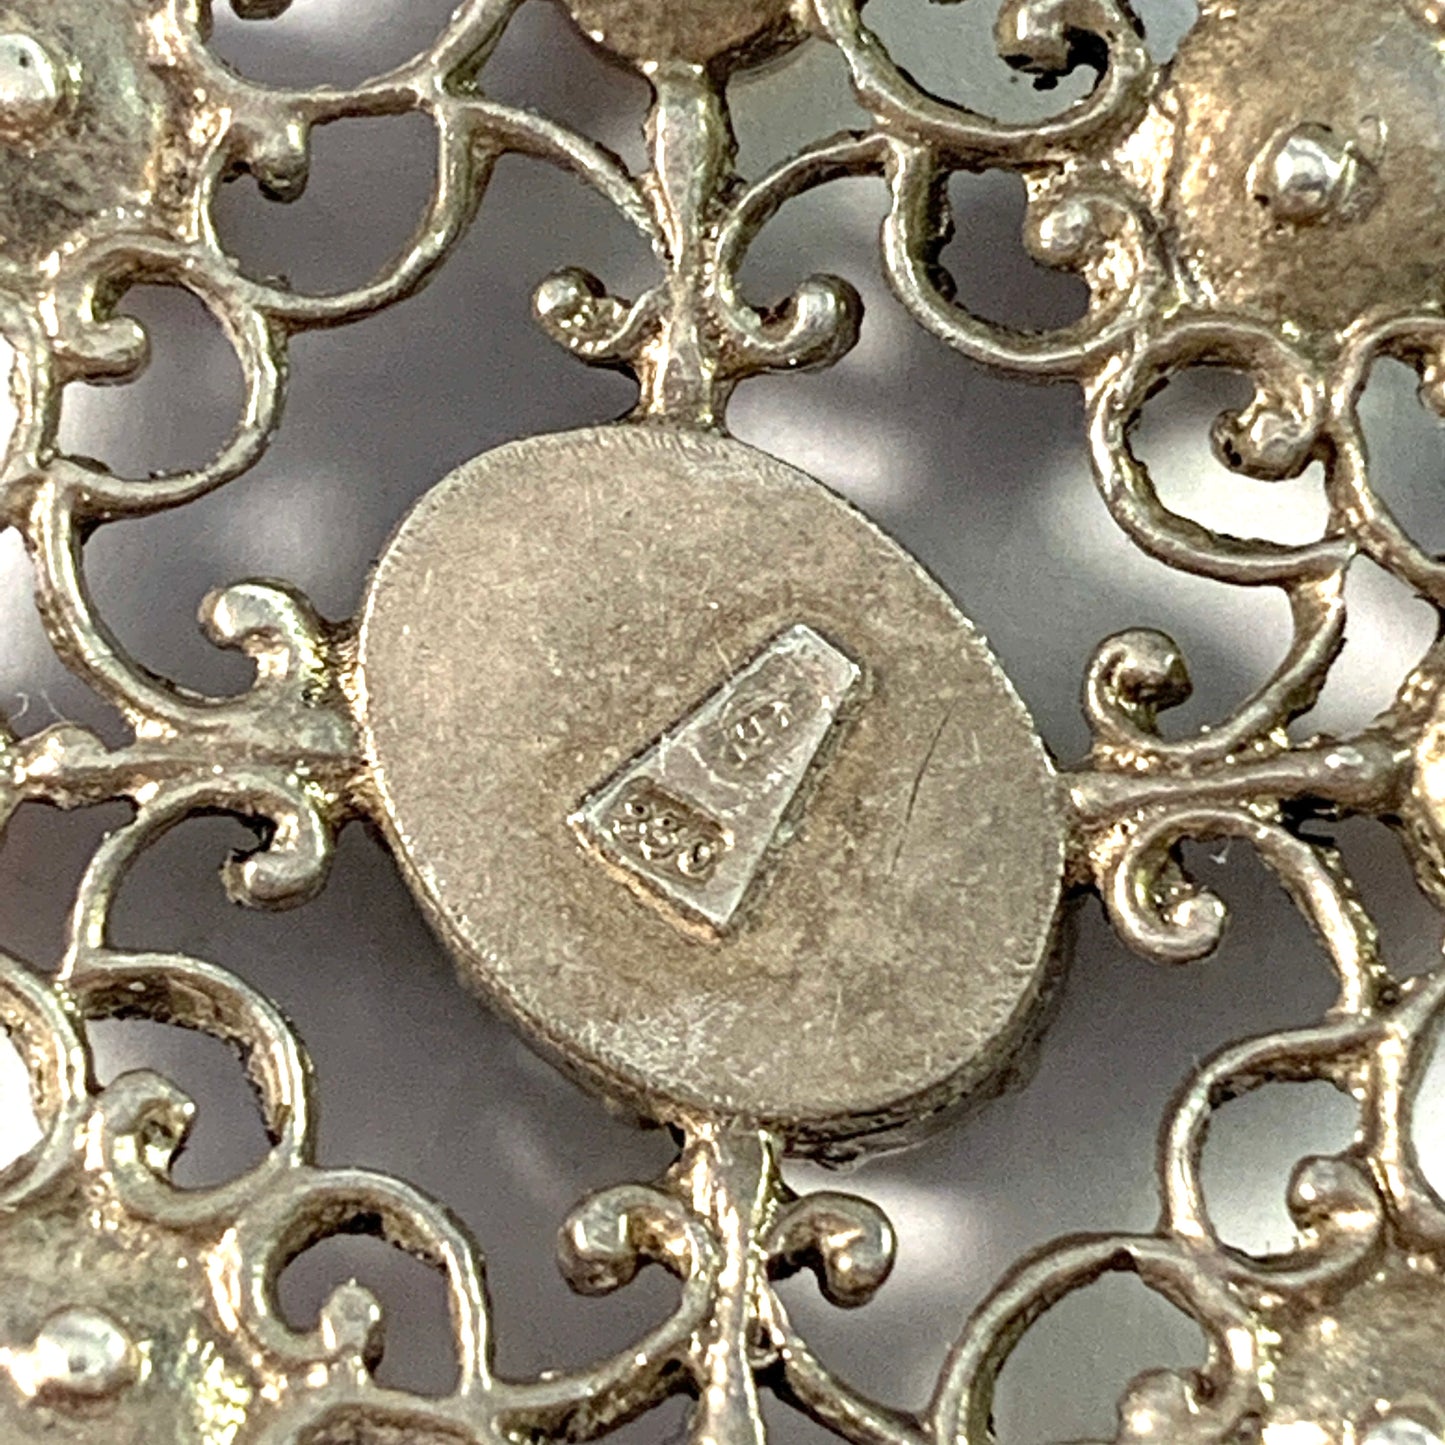 Austria / Germany early 1900s. Solid Silver M o P Foiled Back Paste Pendant.